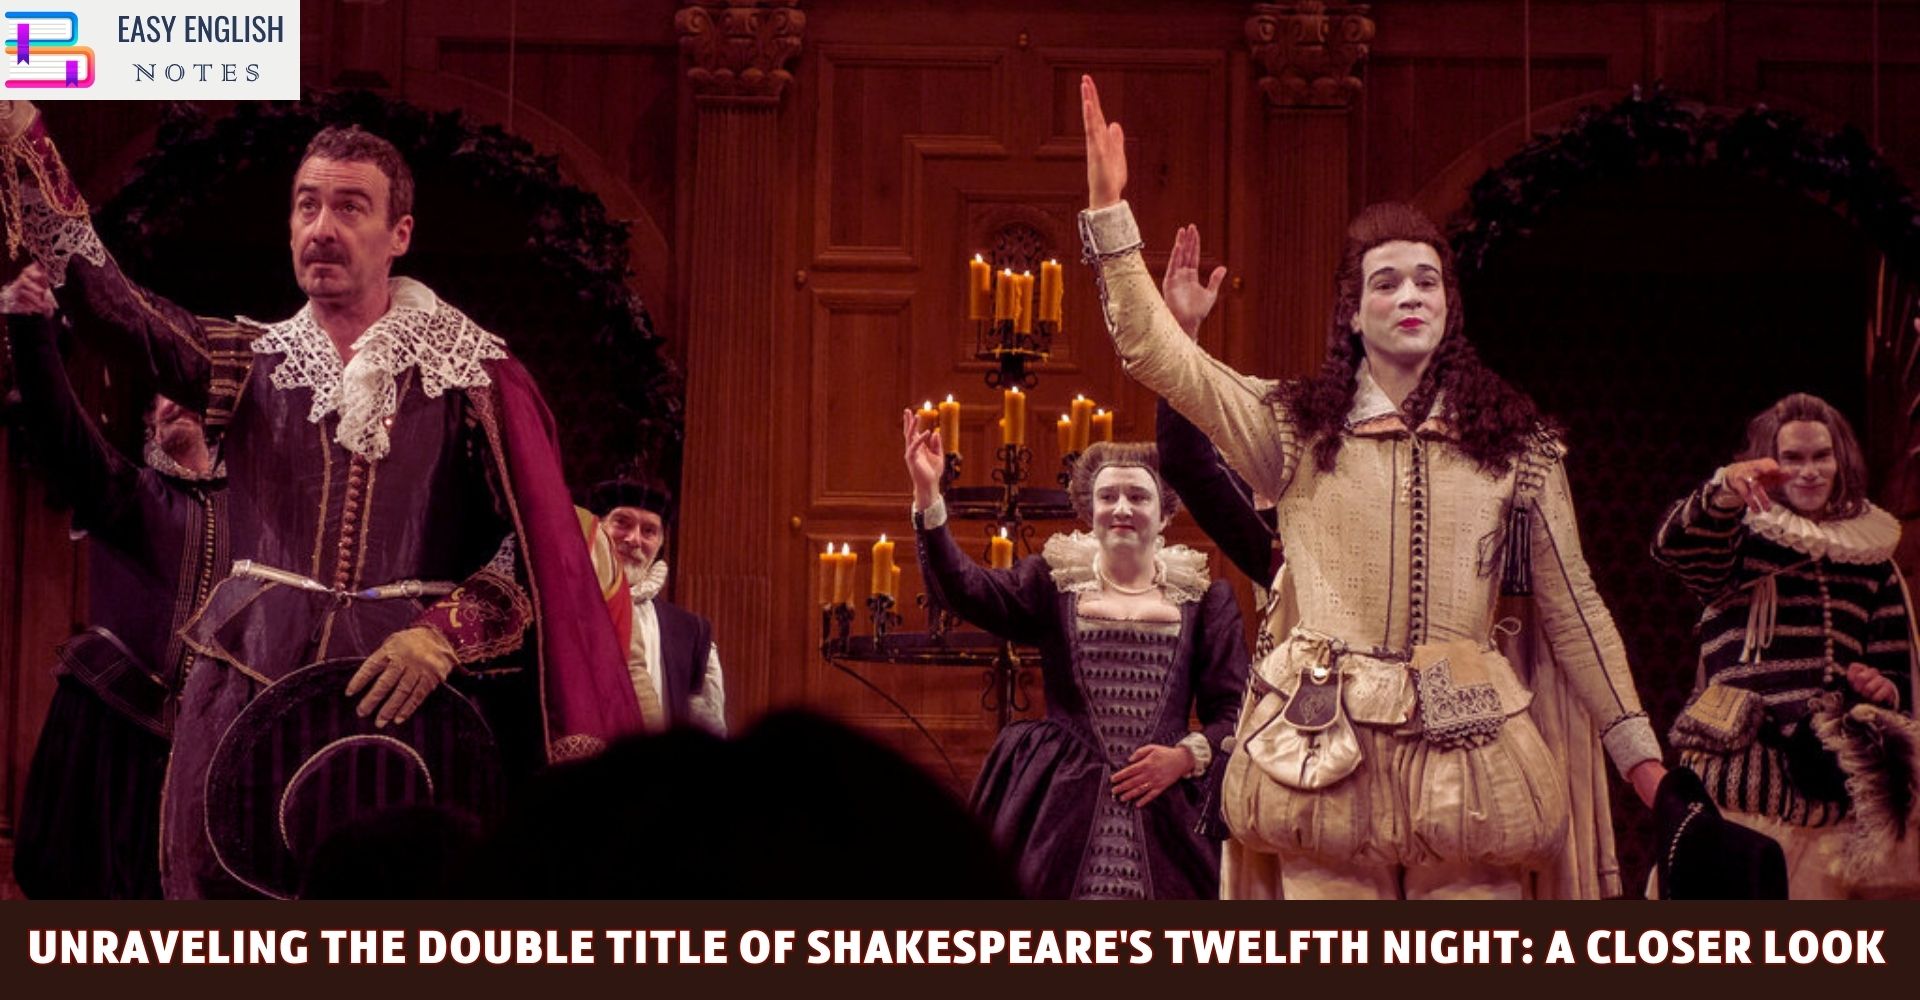 Unraveling the Double Title of Shakespeare's Twelfth Night: A Closer Look